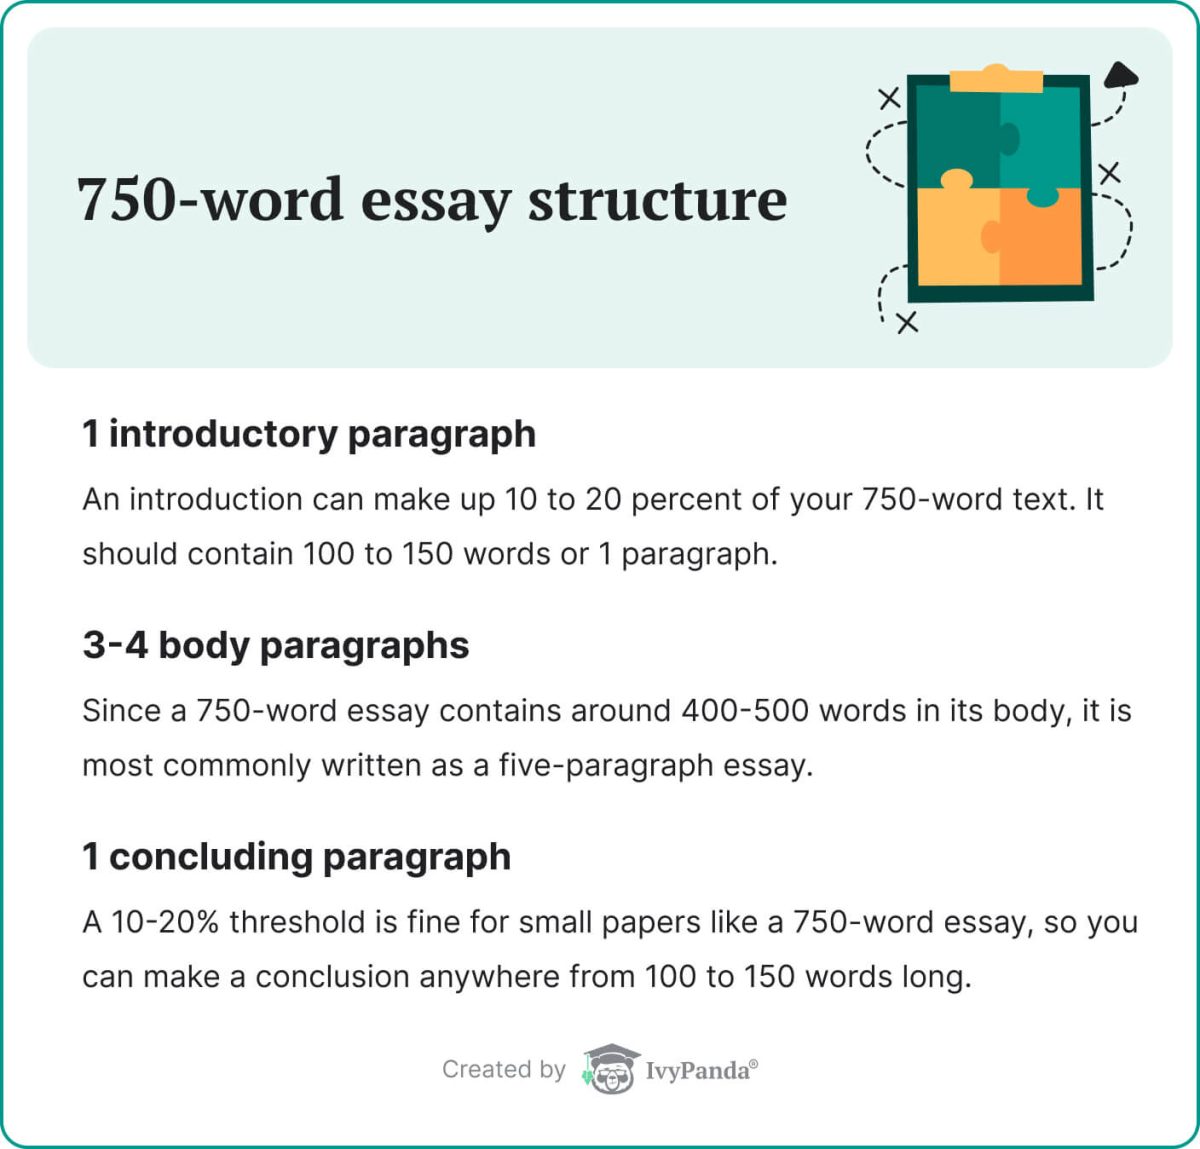 The picture lists the components of a 750-word essay.